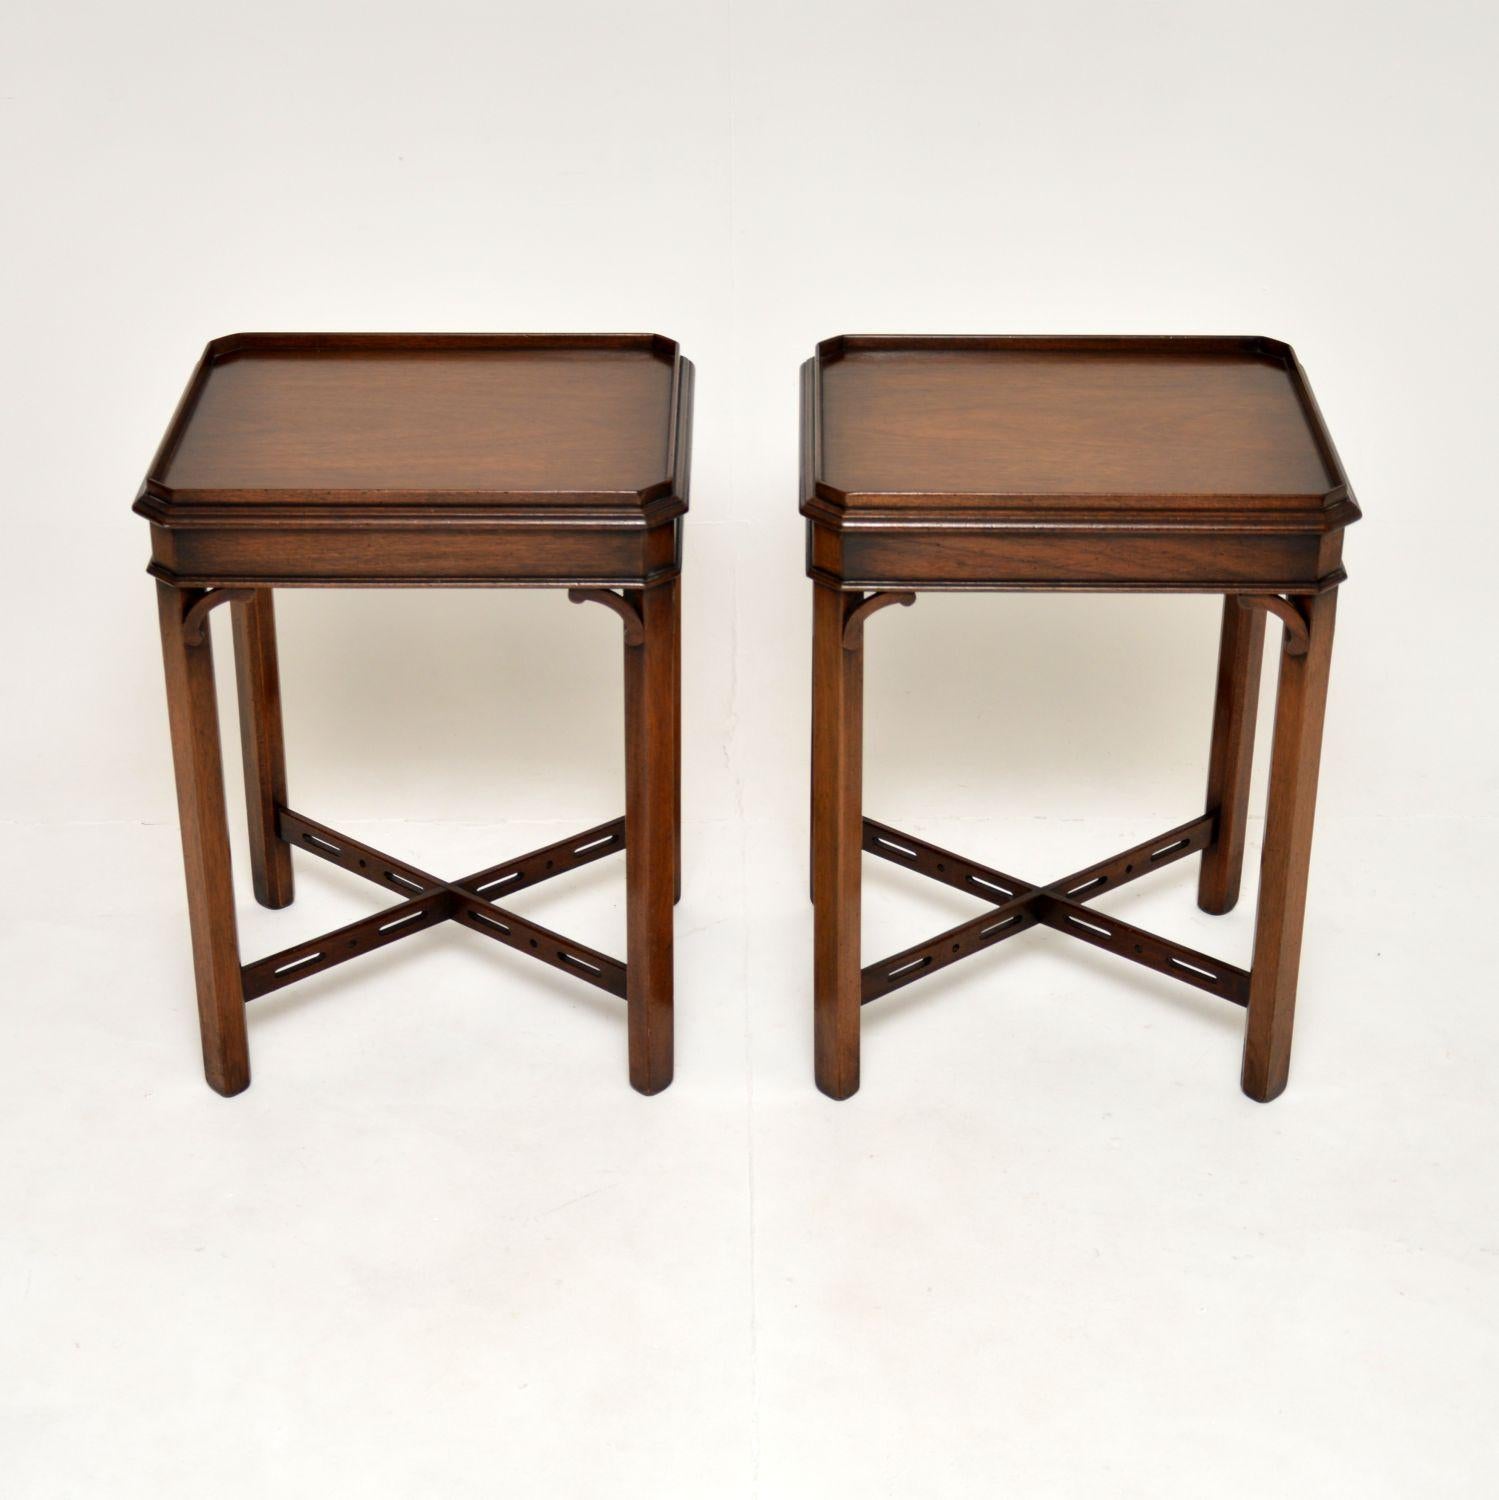 Chippendale Pair of Antique Georgian Style Side Tables